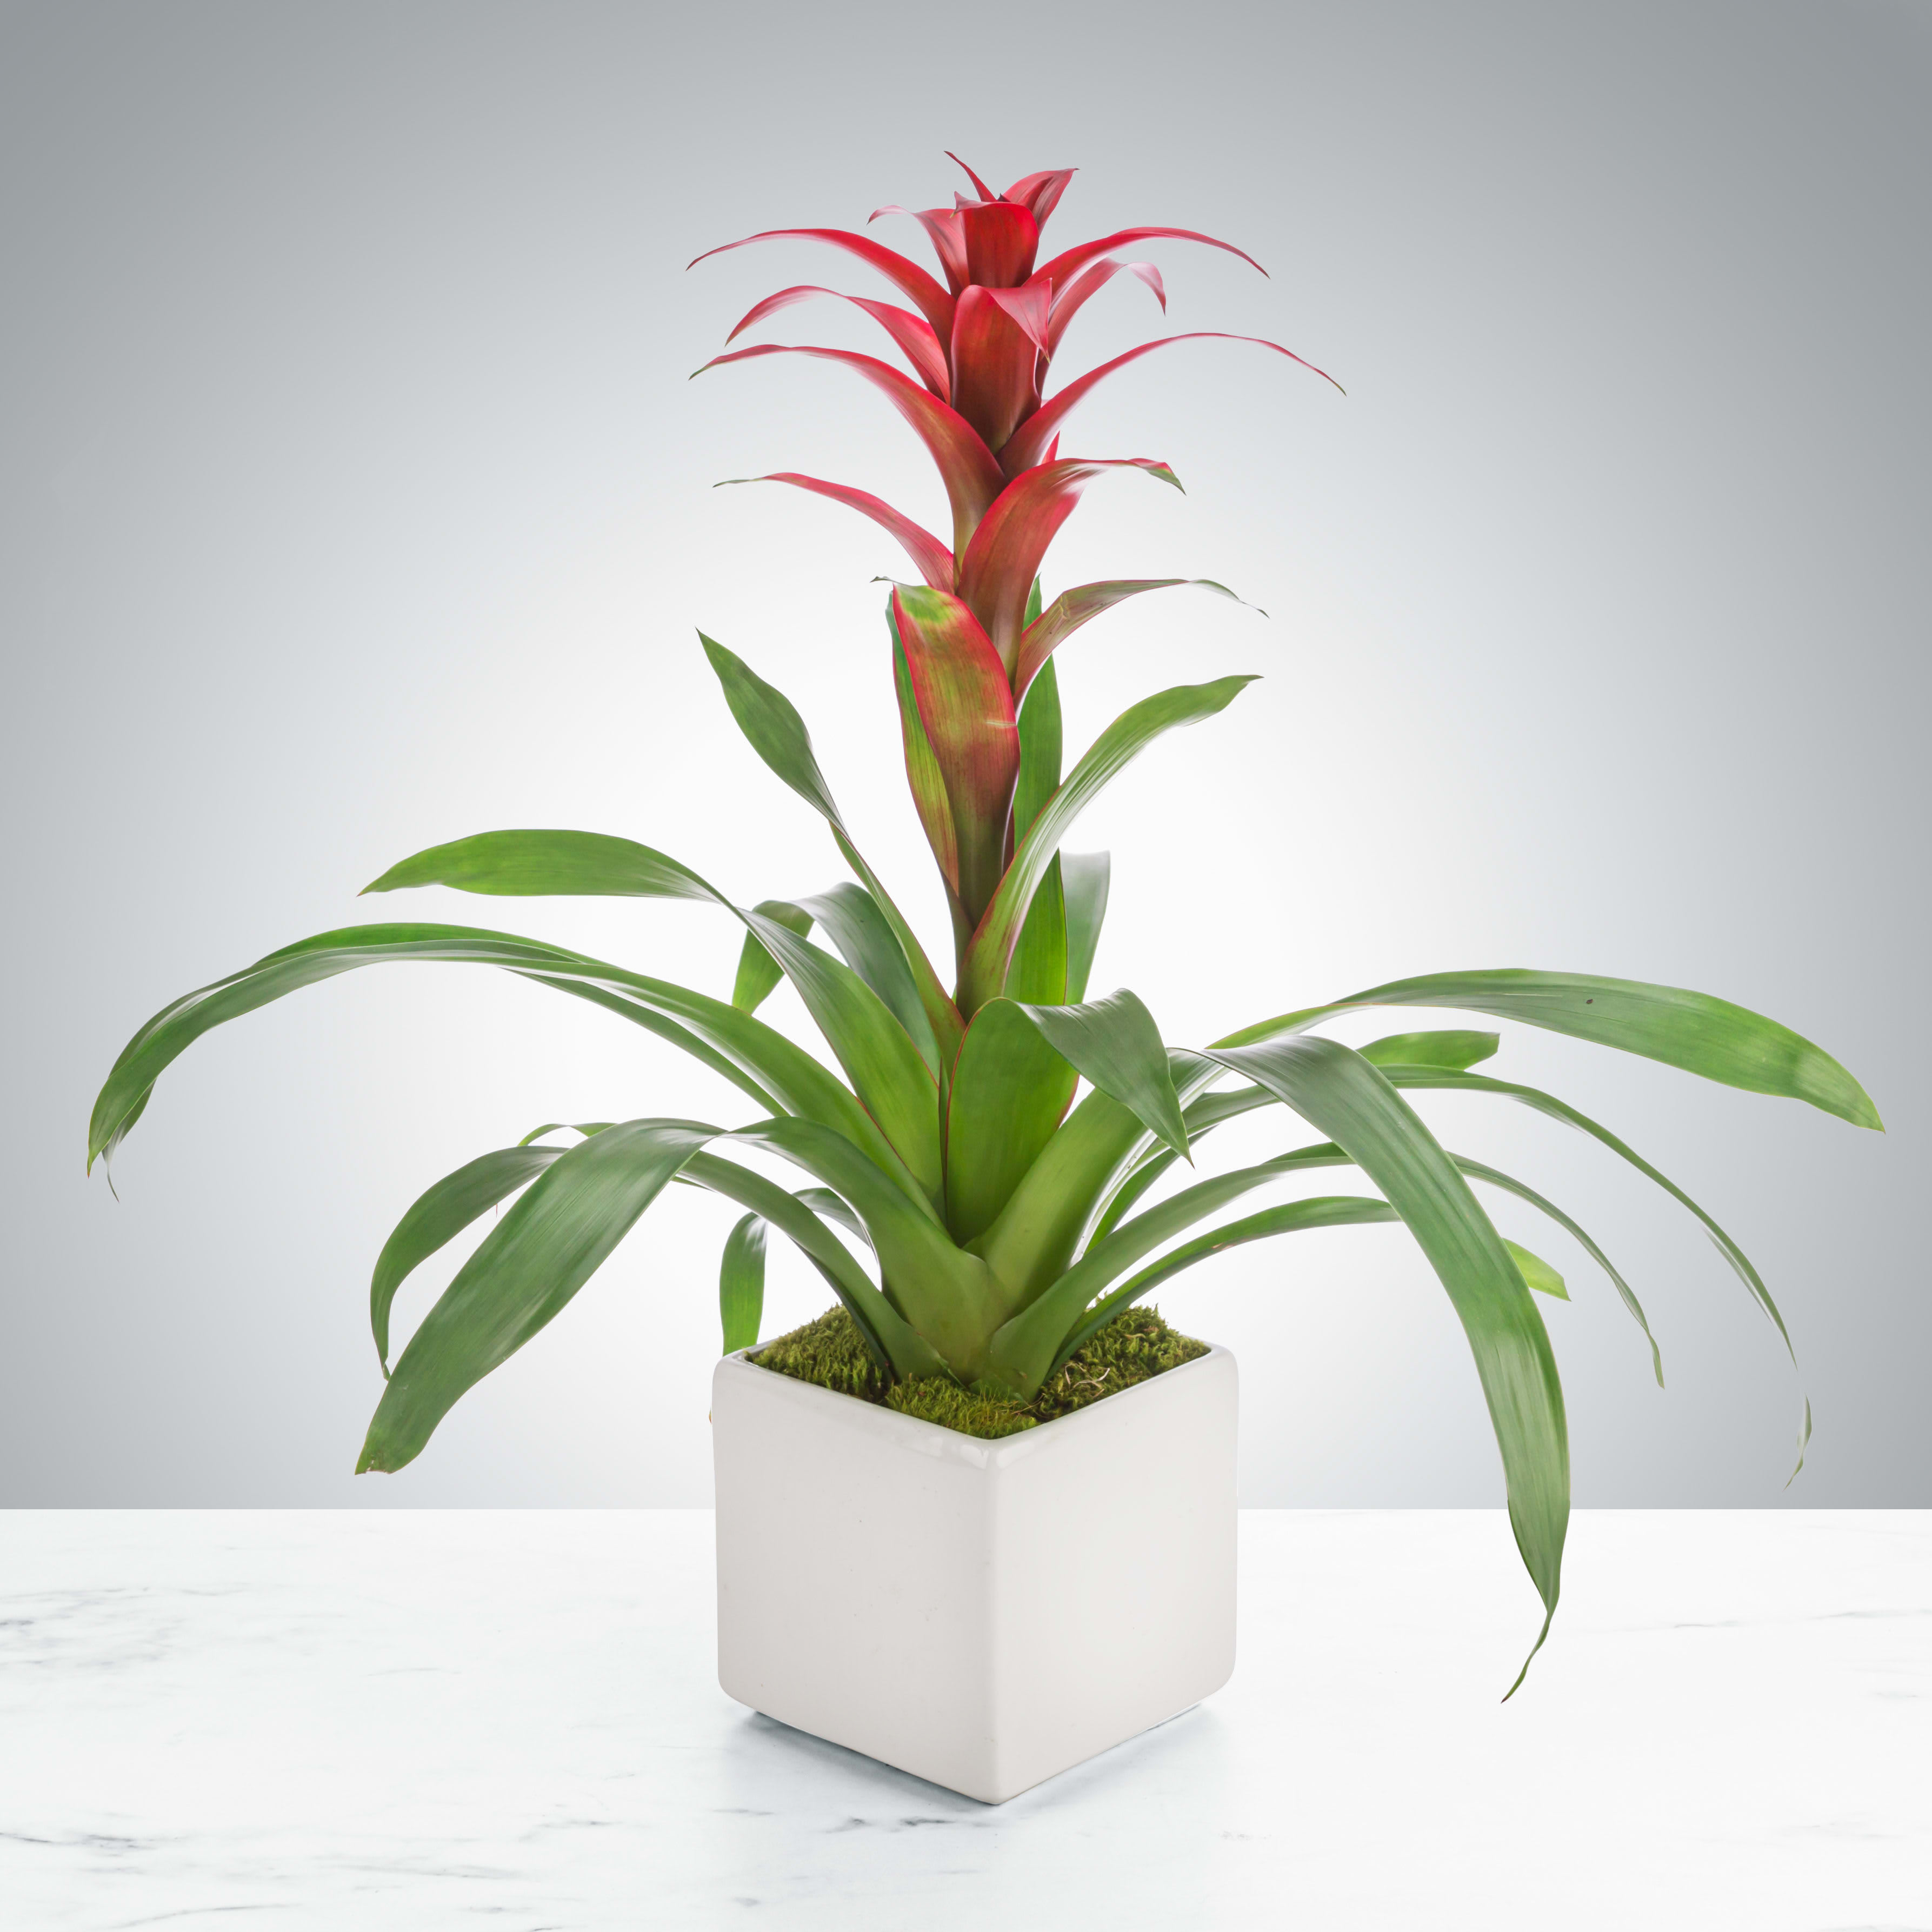 Tropical Bromeliad Plant - A plant with a cool shape, bright color, that works as an air purifier AND is long-lasting? What more could you want from a house plant? The tropical bromeliad plant does best with moderate/bright light and loves humidity so they do great in a bathroom with a window.